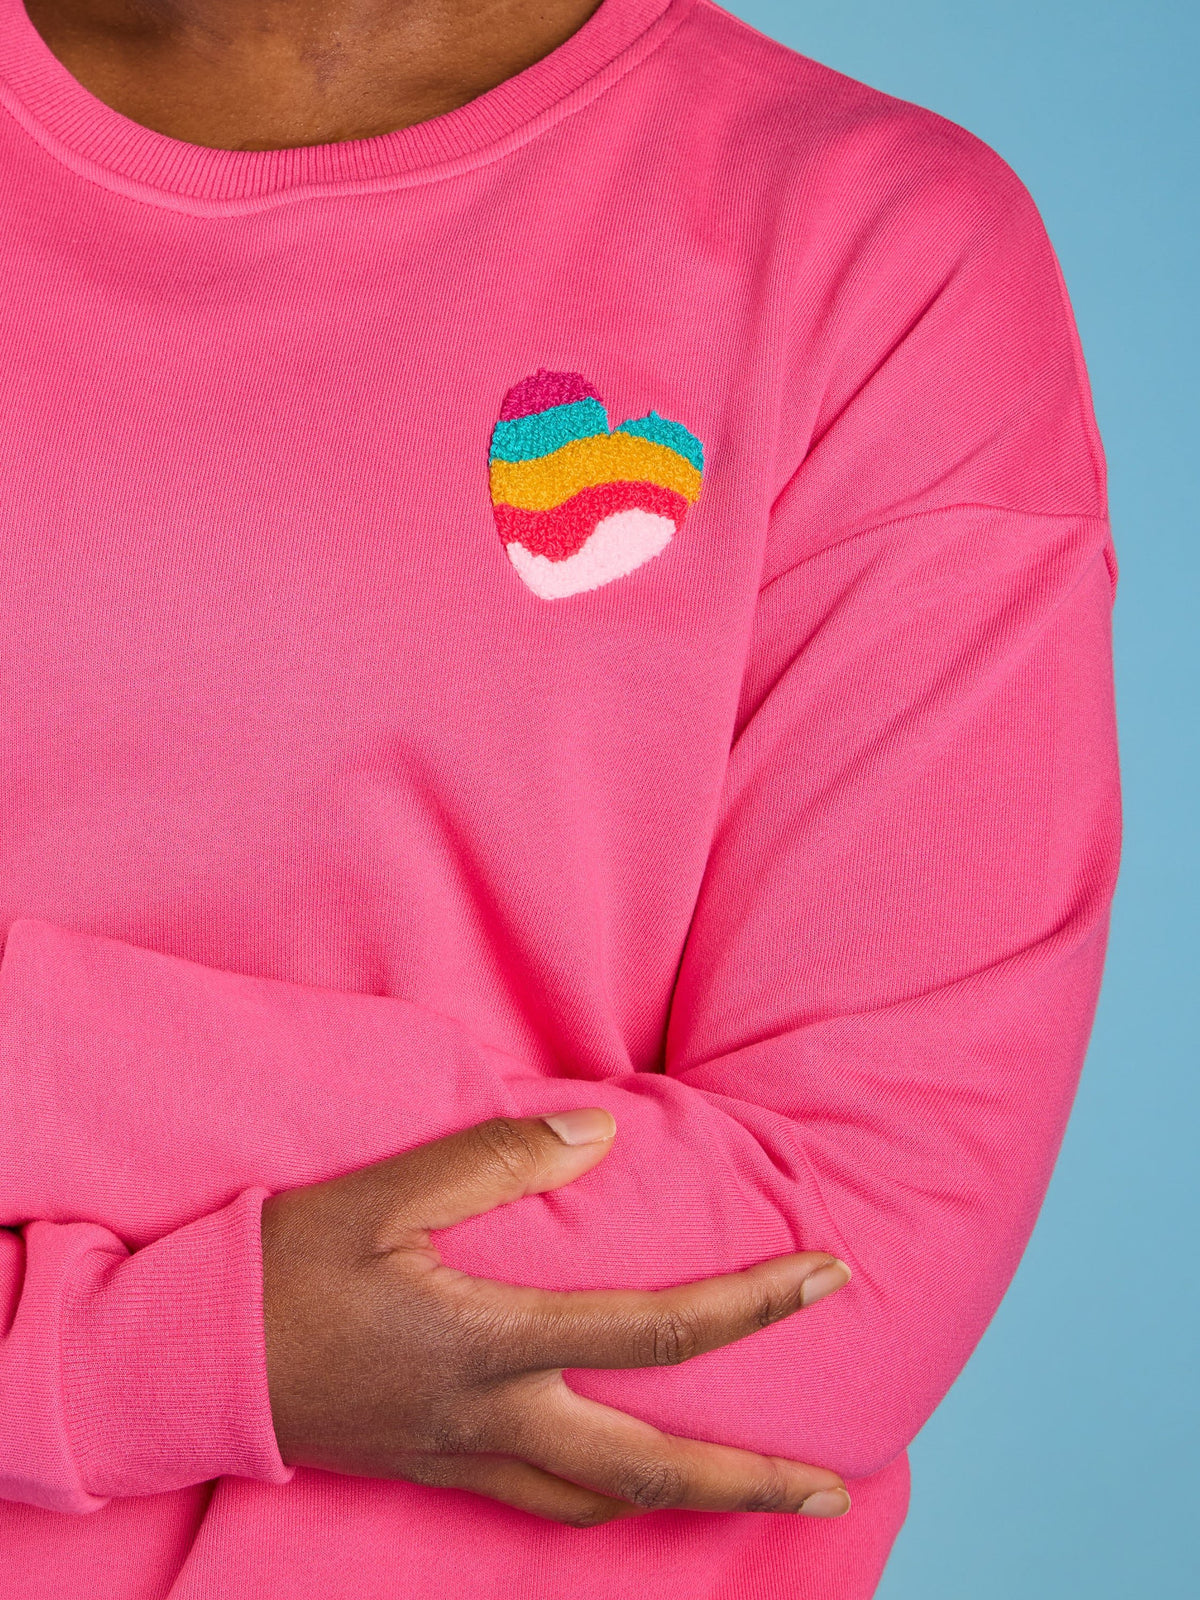 Rainbow at Heart Organic Cotton Sweatshirt - Dolly Pink - pink jumper with embroidered love heart